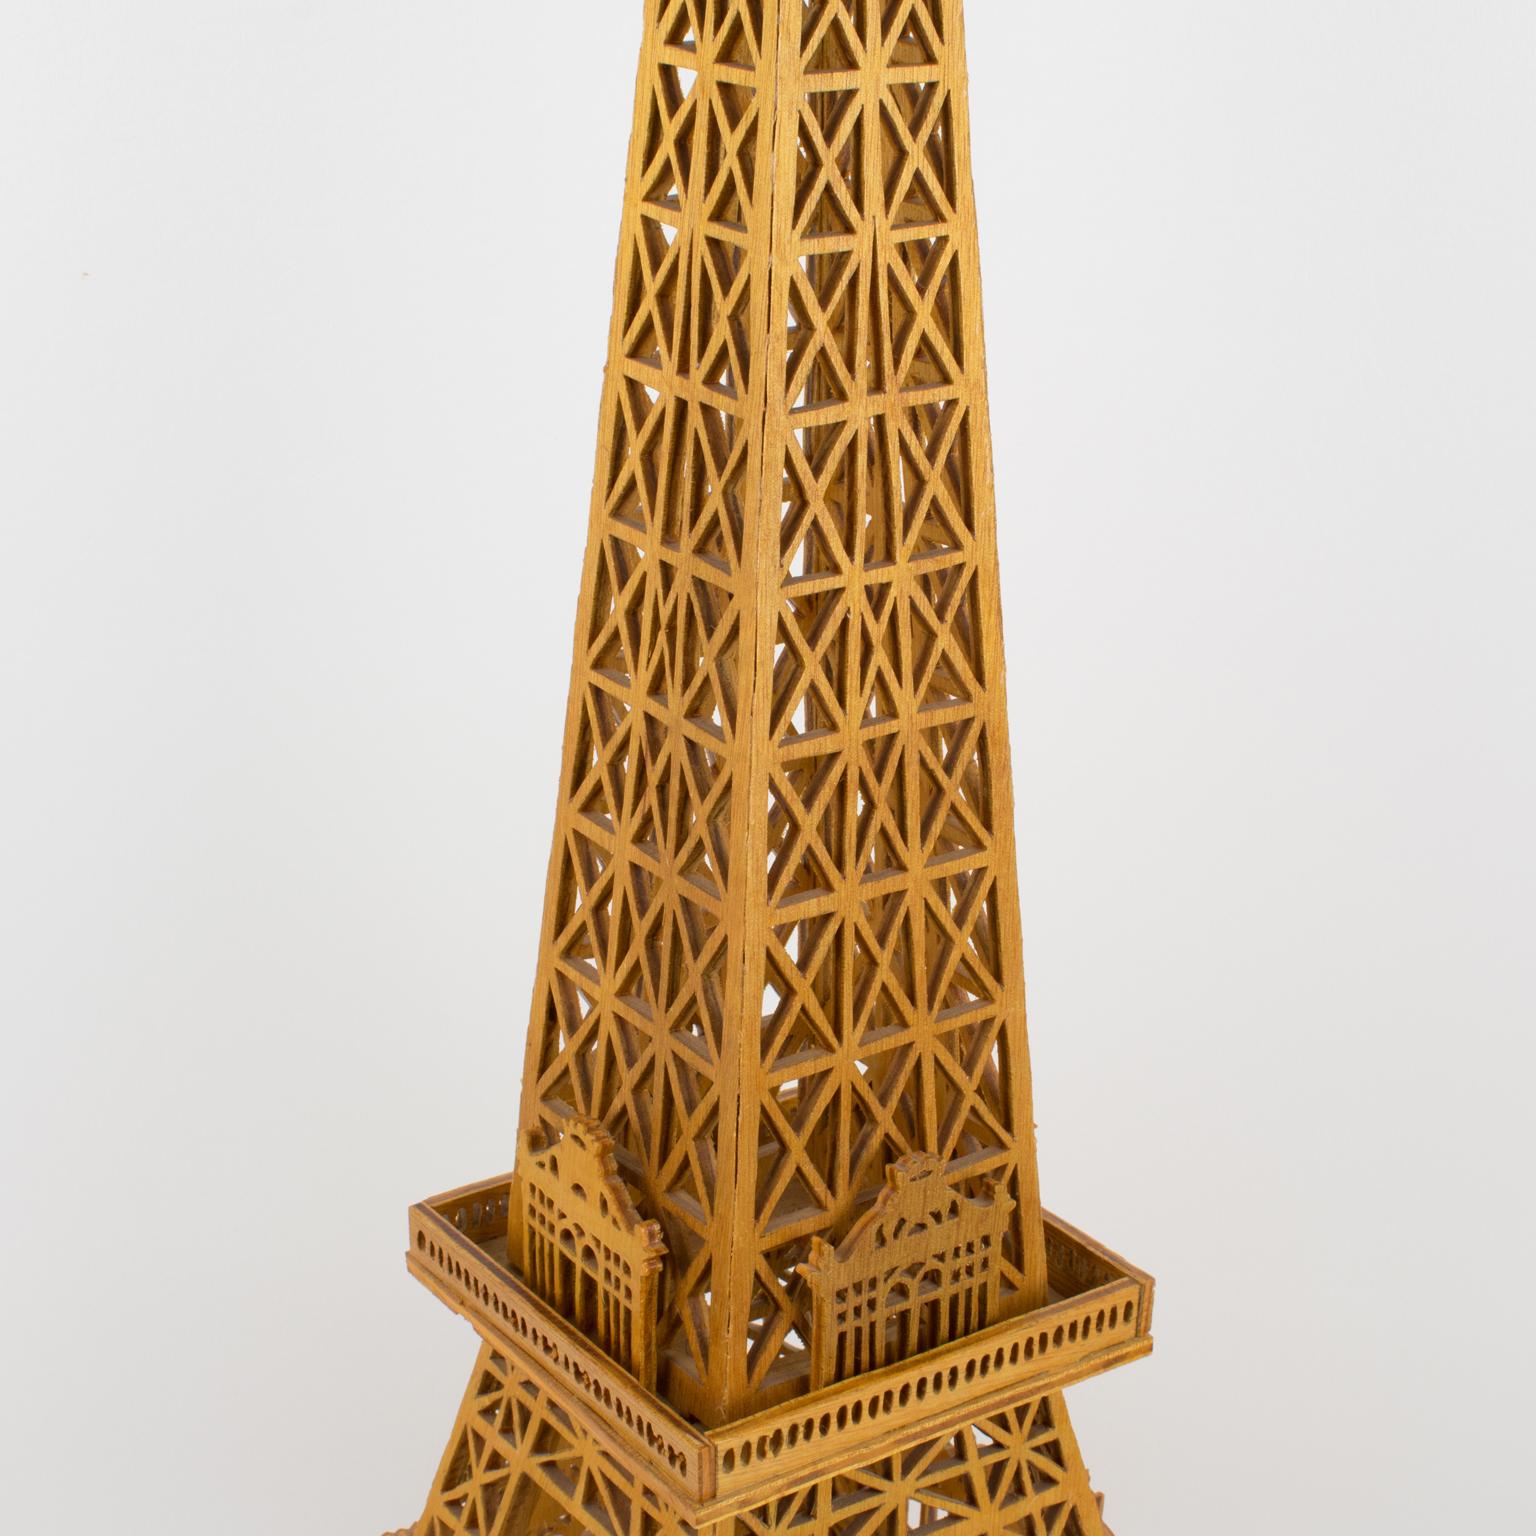 French Hand-Carved Wooden Eiffel Tower Model Miniature Sculpture 13